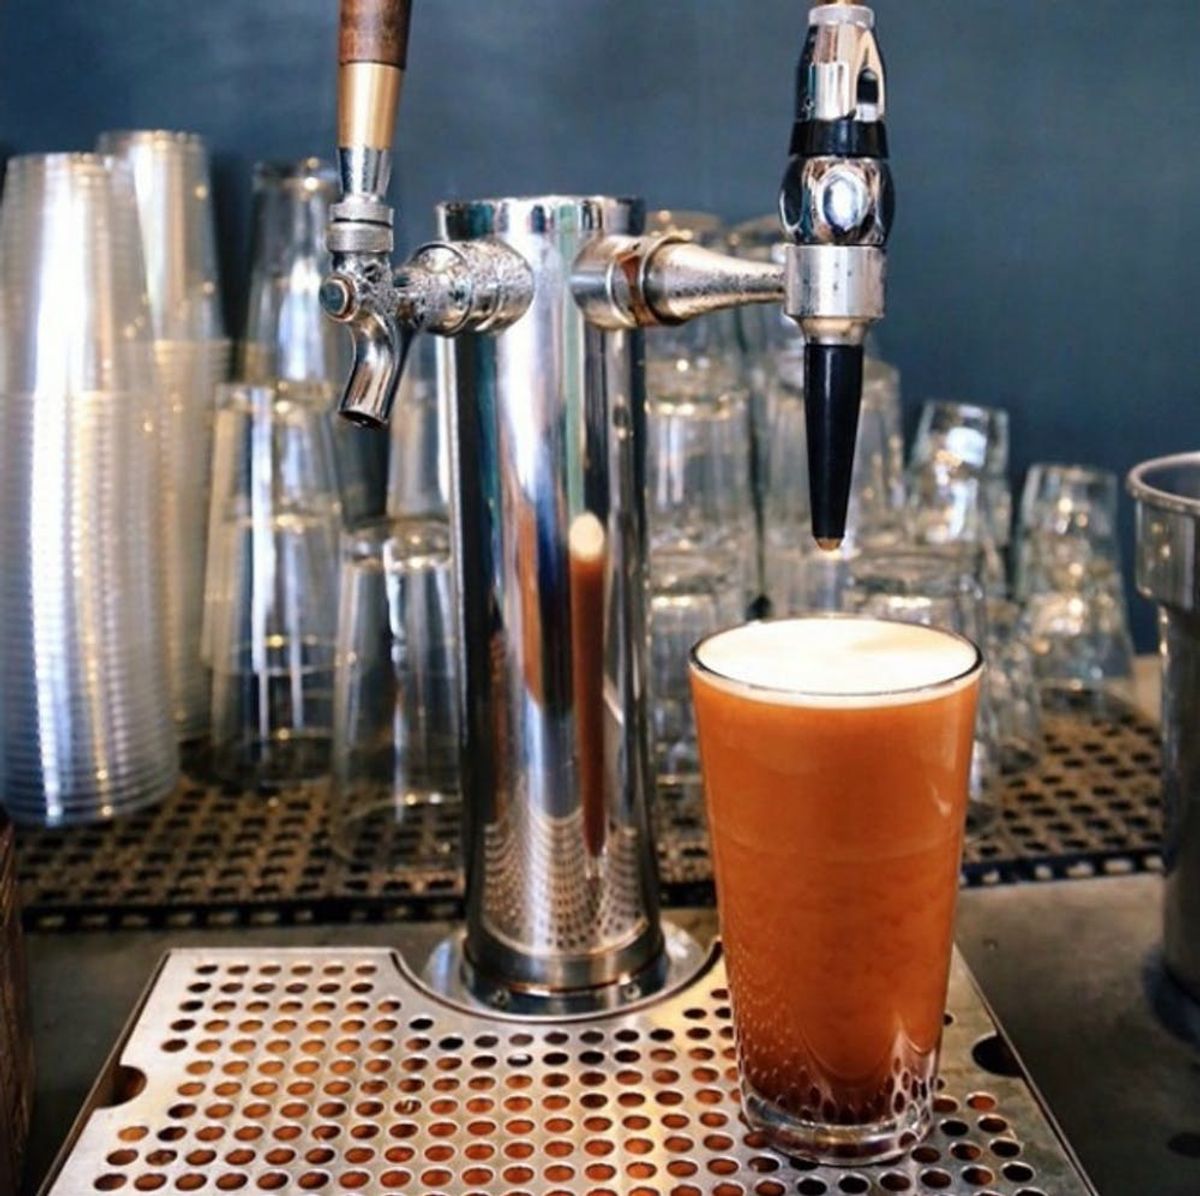 Move Over, Cold Brew: Nitro Coffee Is Giving Us a New Kind of Buzz